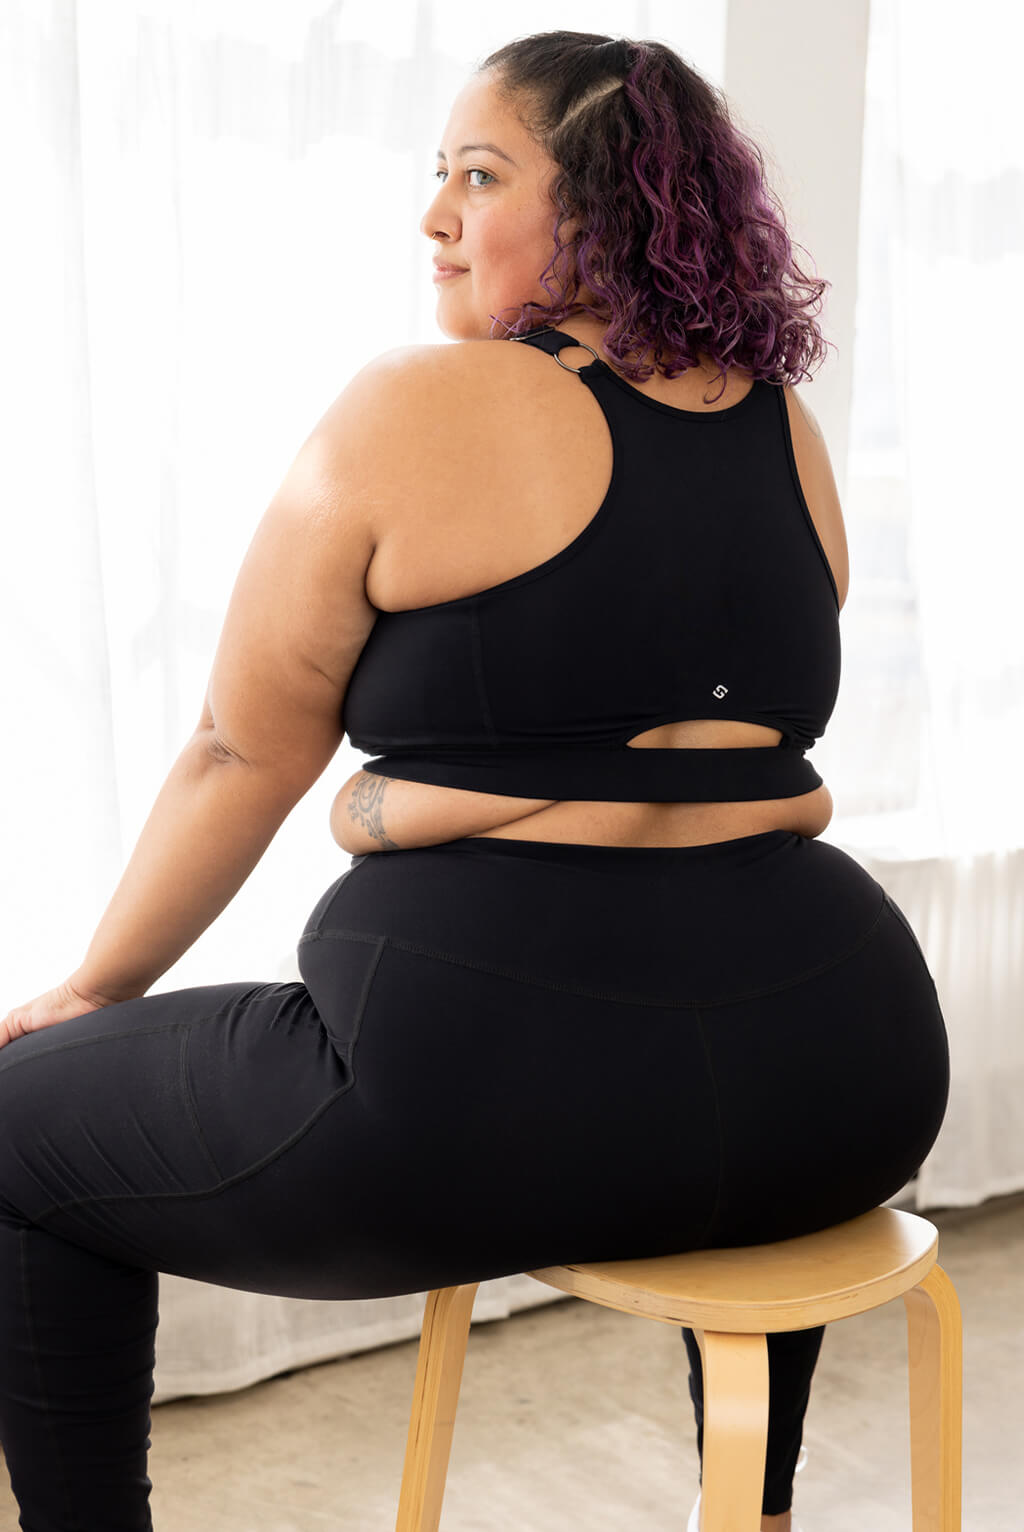 plus size leggings with pockets, activewear for plus women